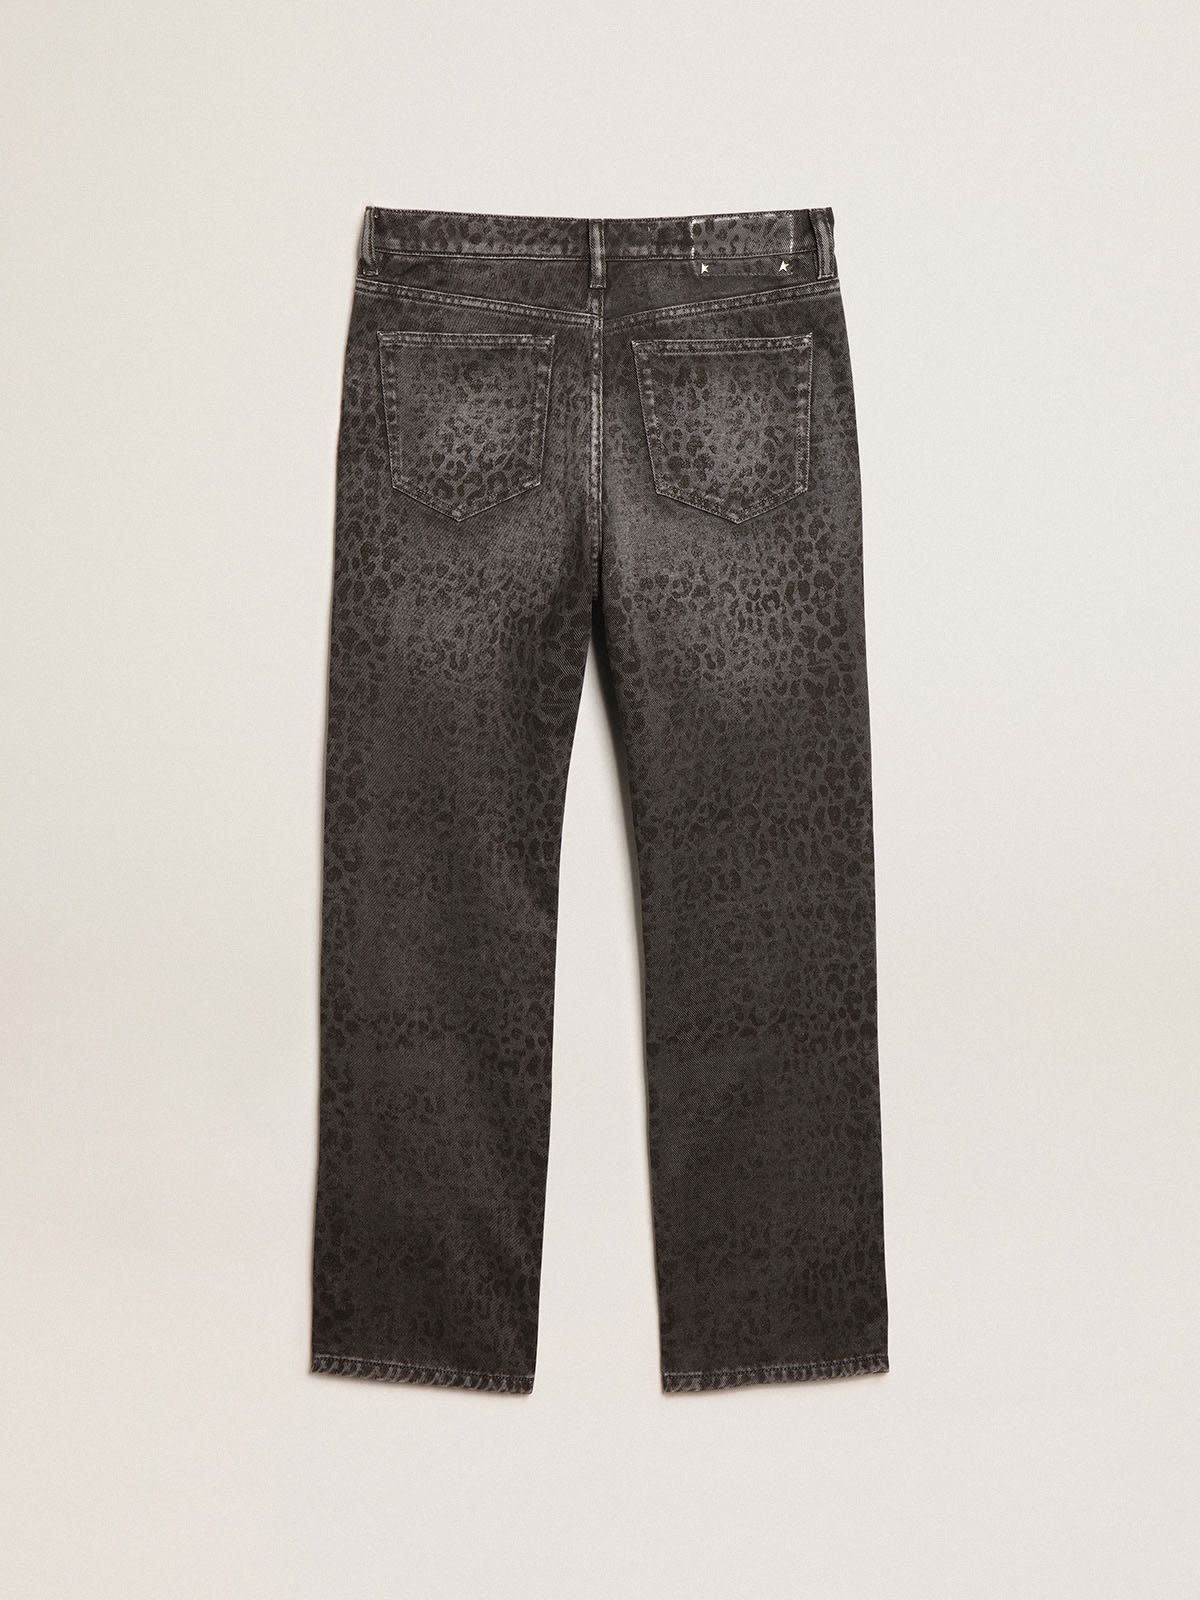 Golden Goose - Women’s gray jeans with leopard print in 